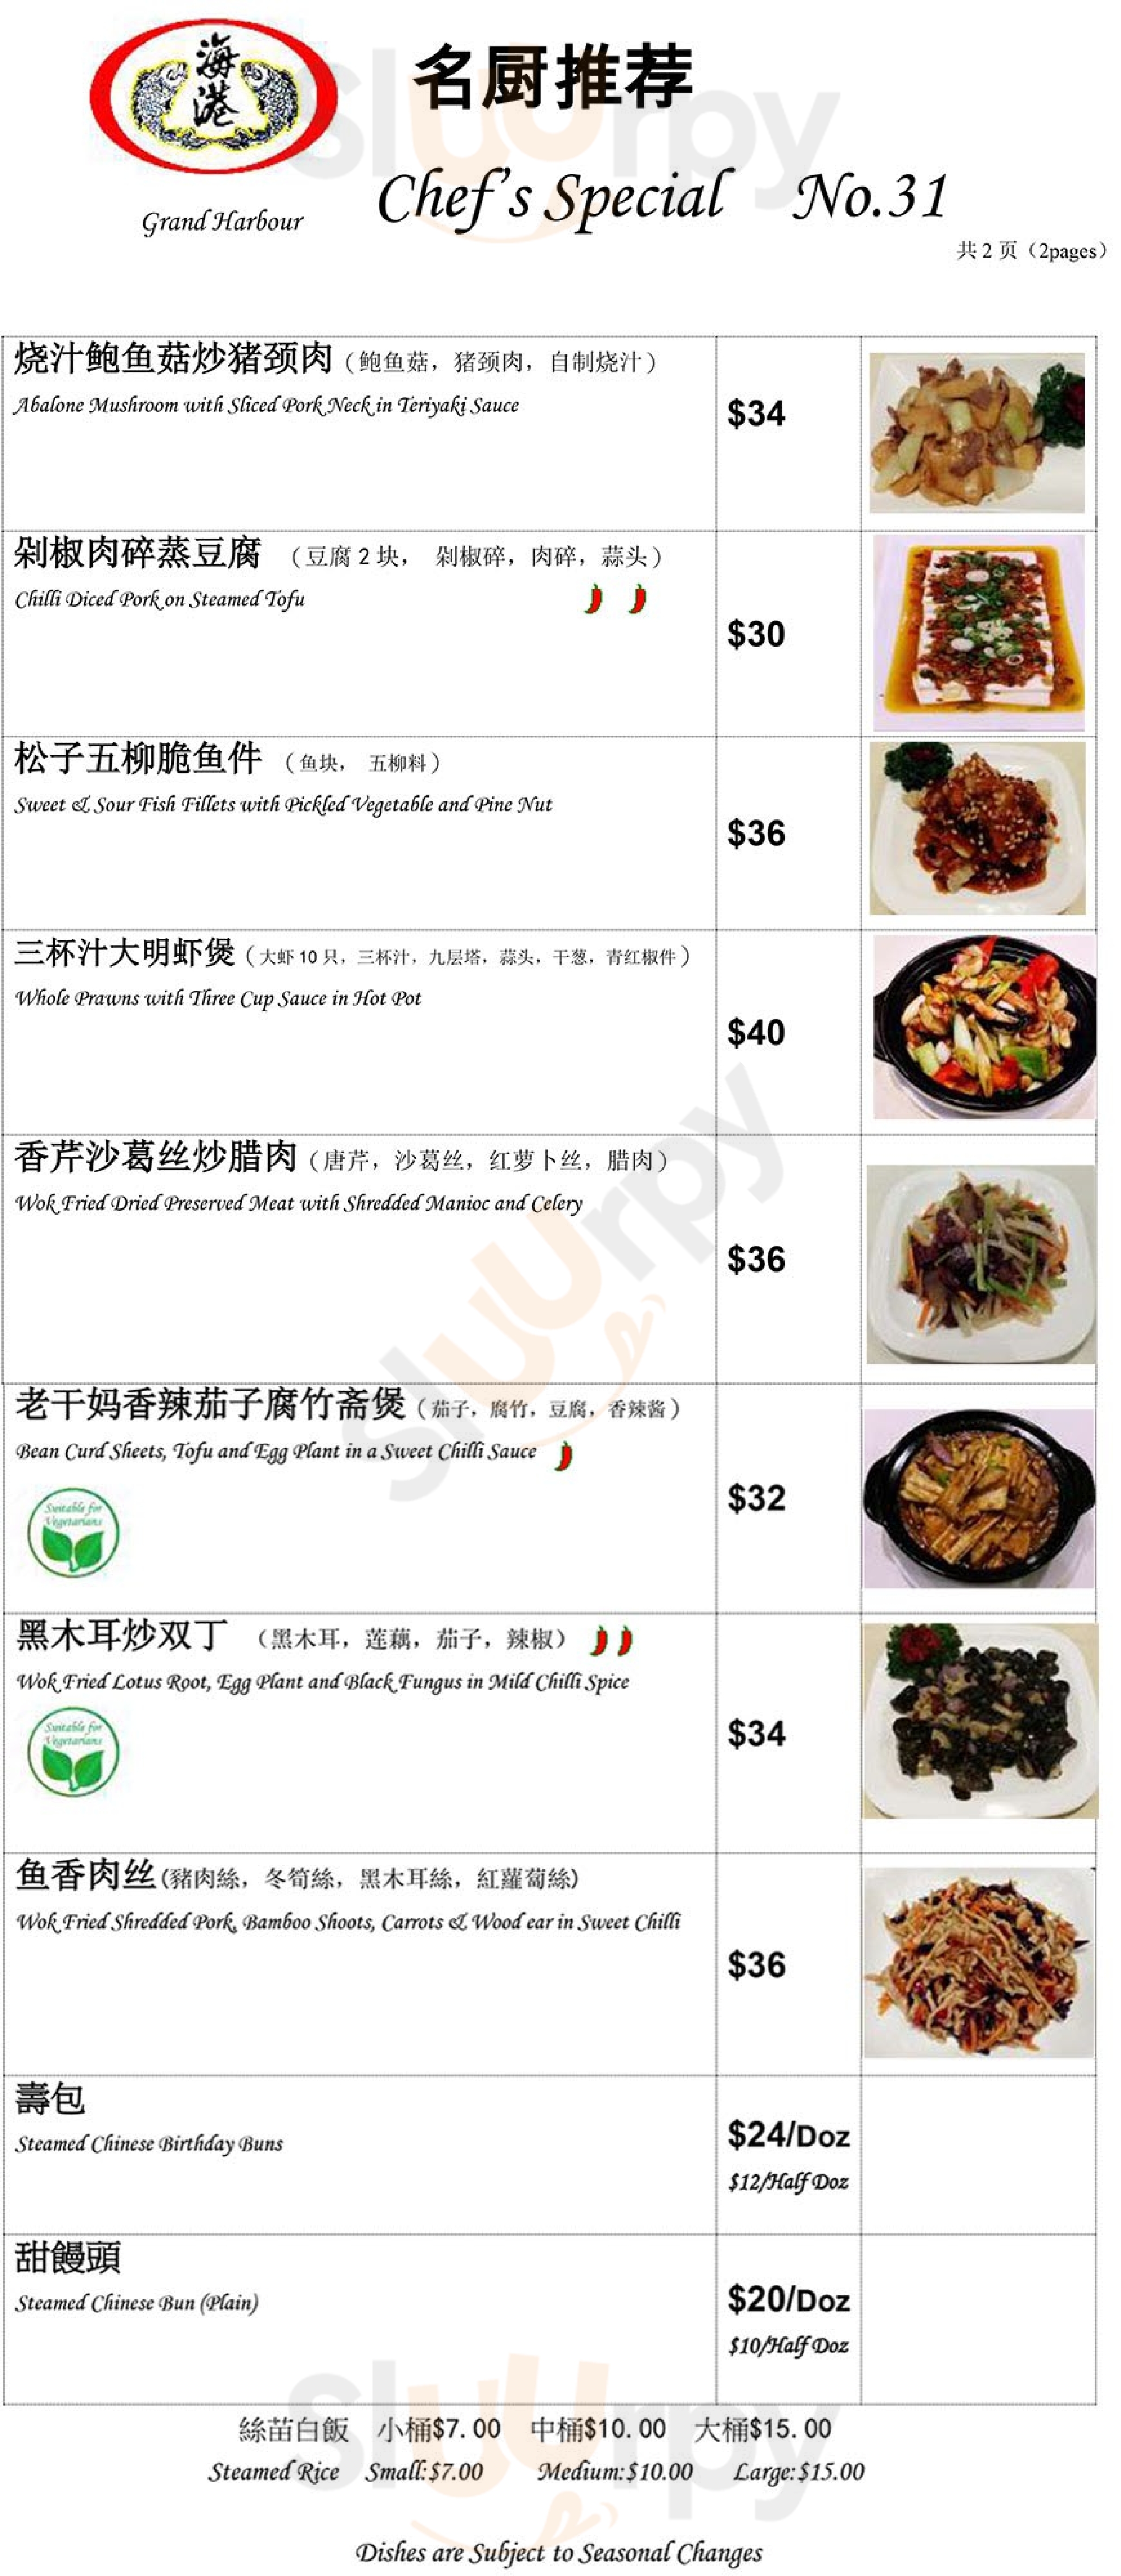 Grand Harbour Chinese Restaurant Auckland Central Menu - 1